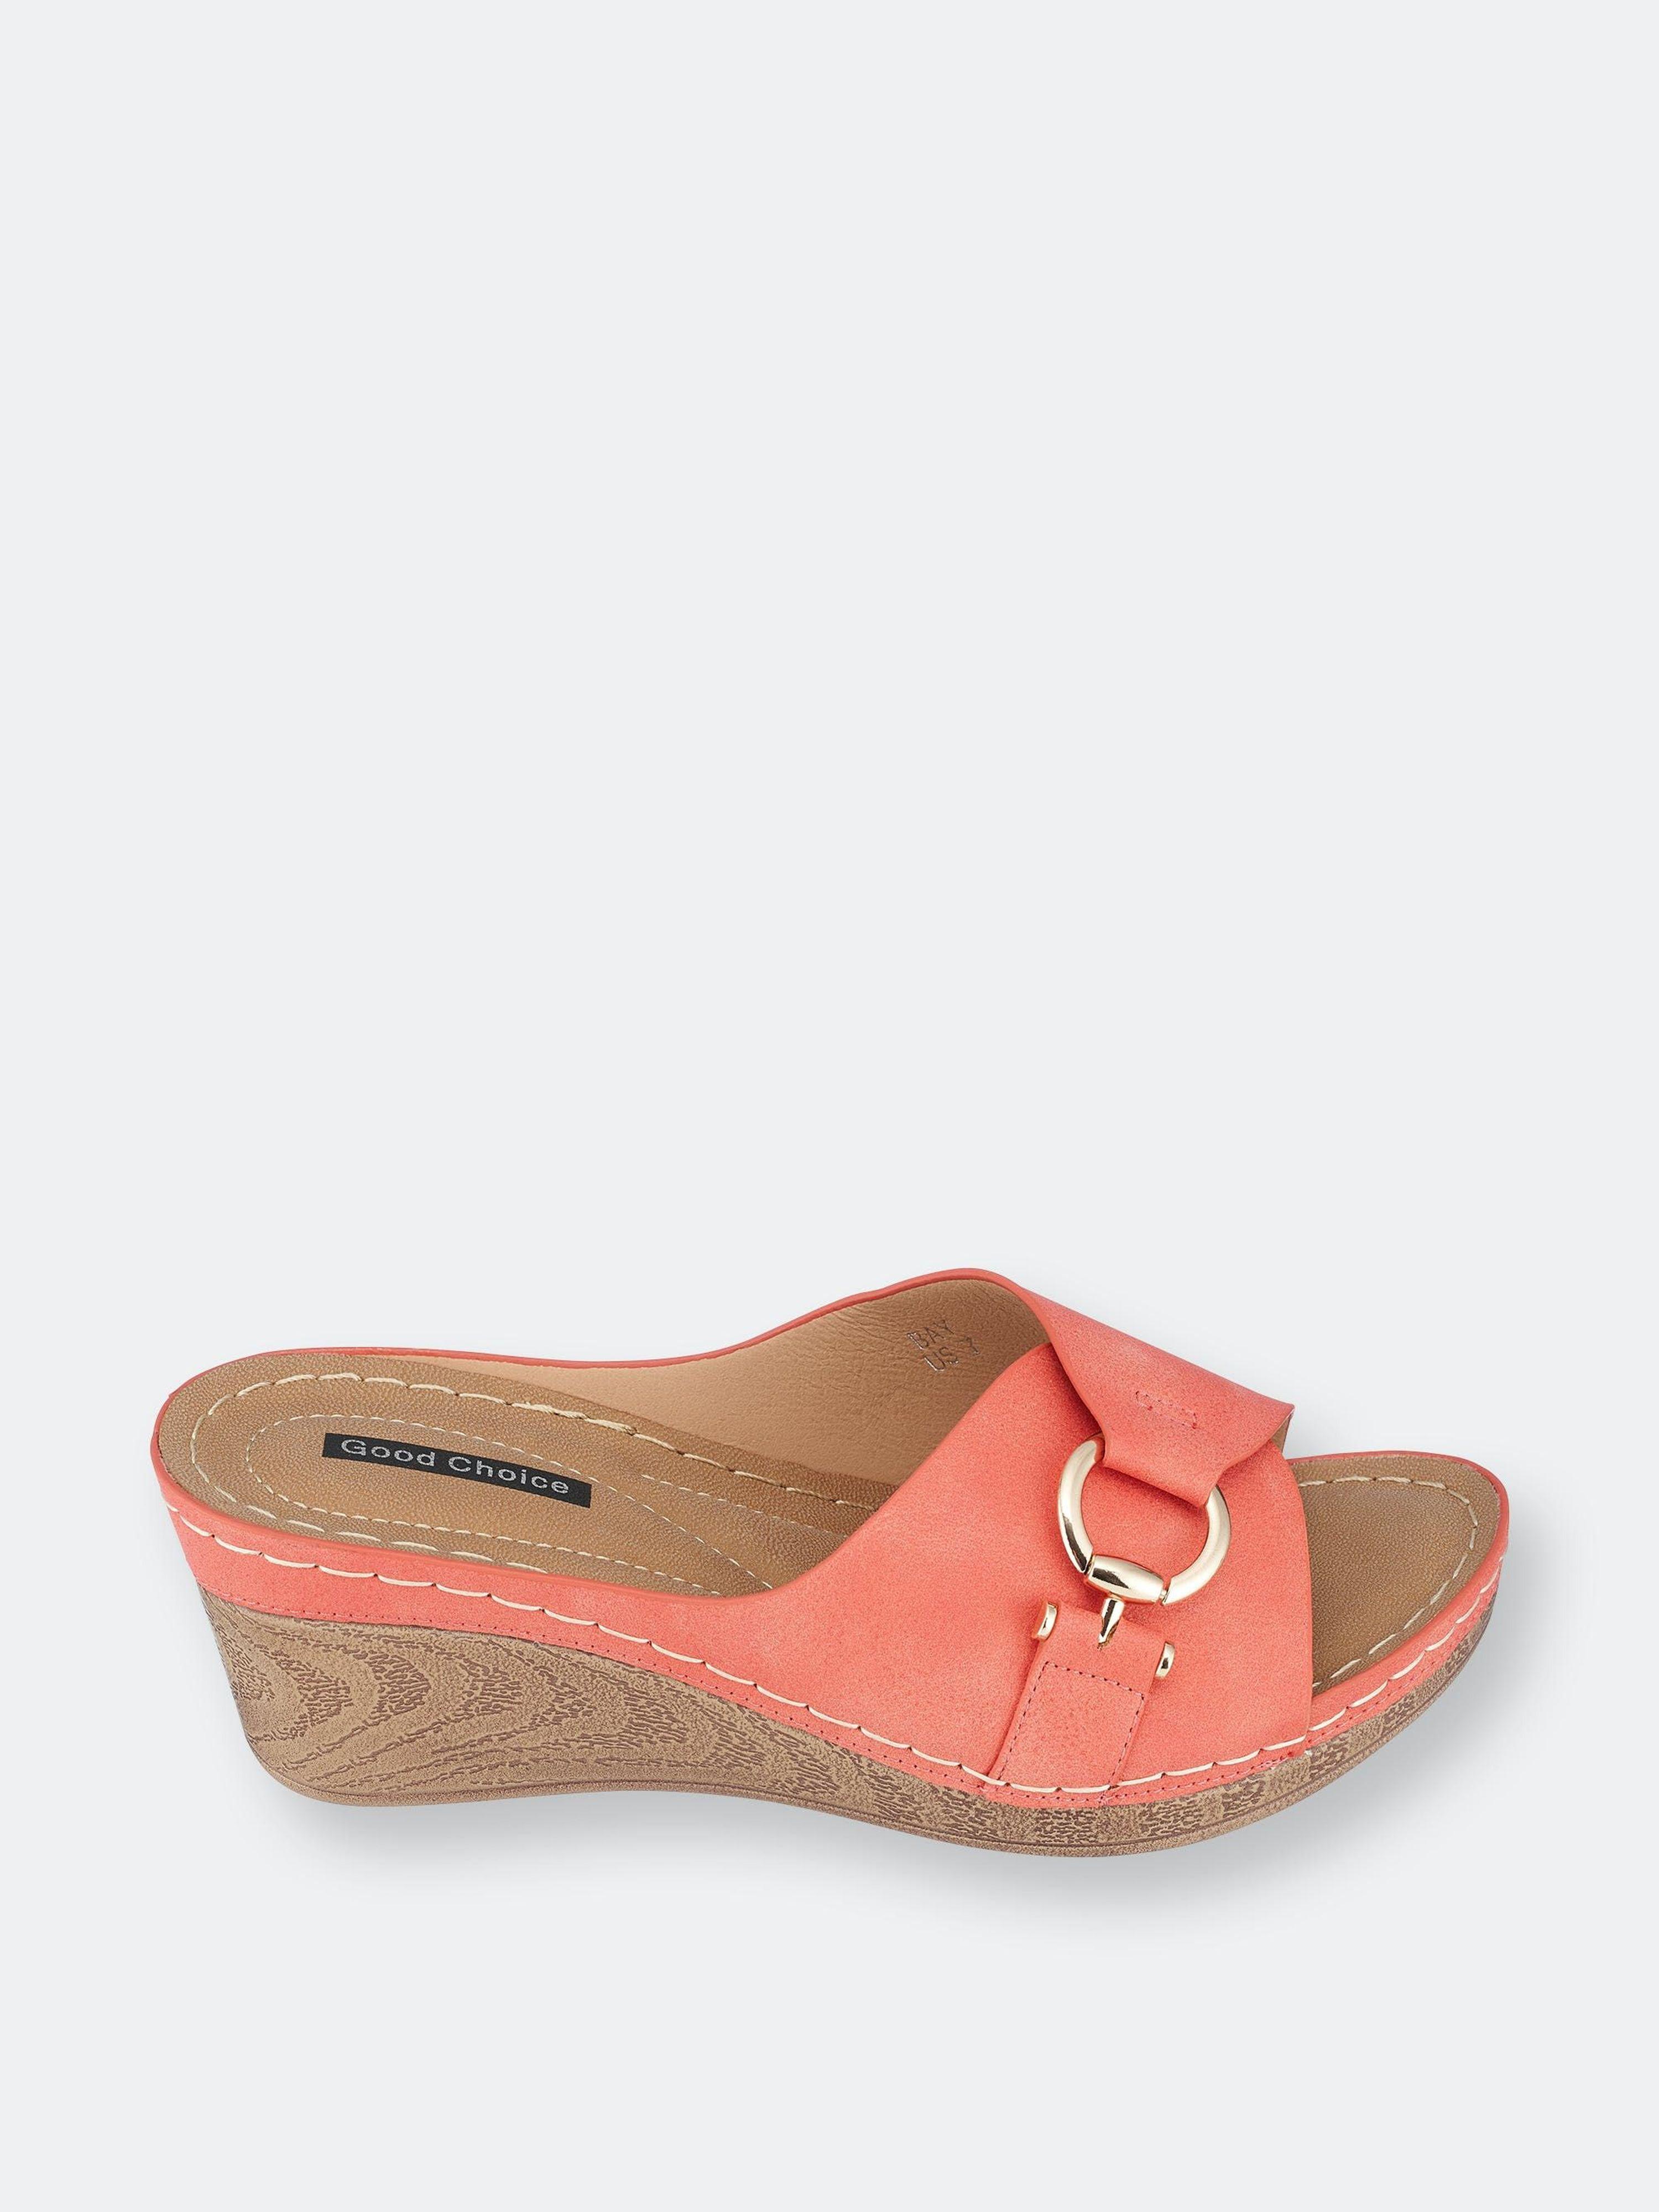 Gc Shoes Bay Coral Wedge Sandals in Pink | Lyst